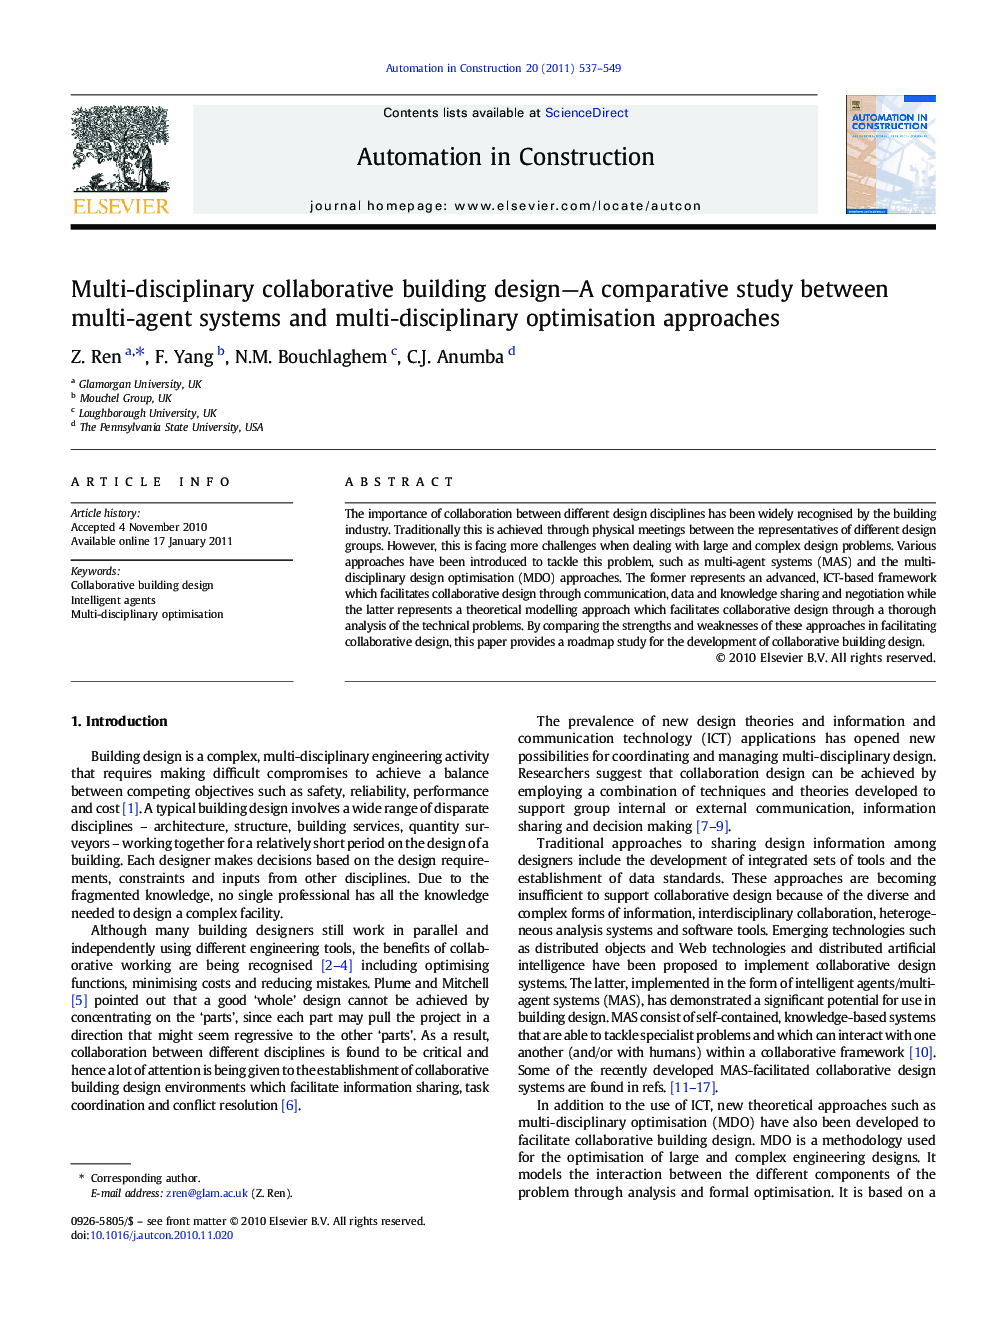 Multi-disciplinary collaborative building design—A comparative study between multi-agent systems and multi-disciplinary optimisation approaches